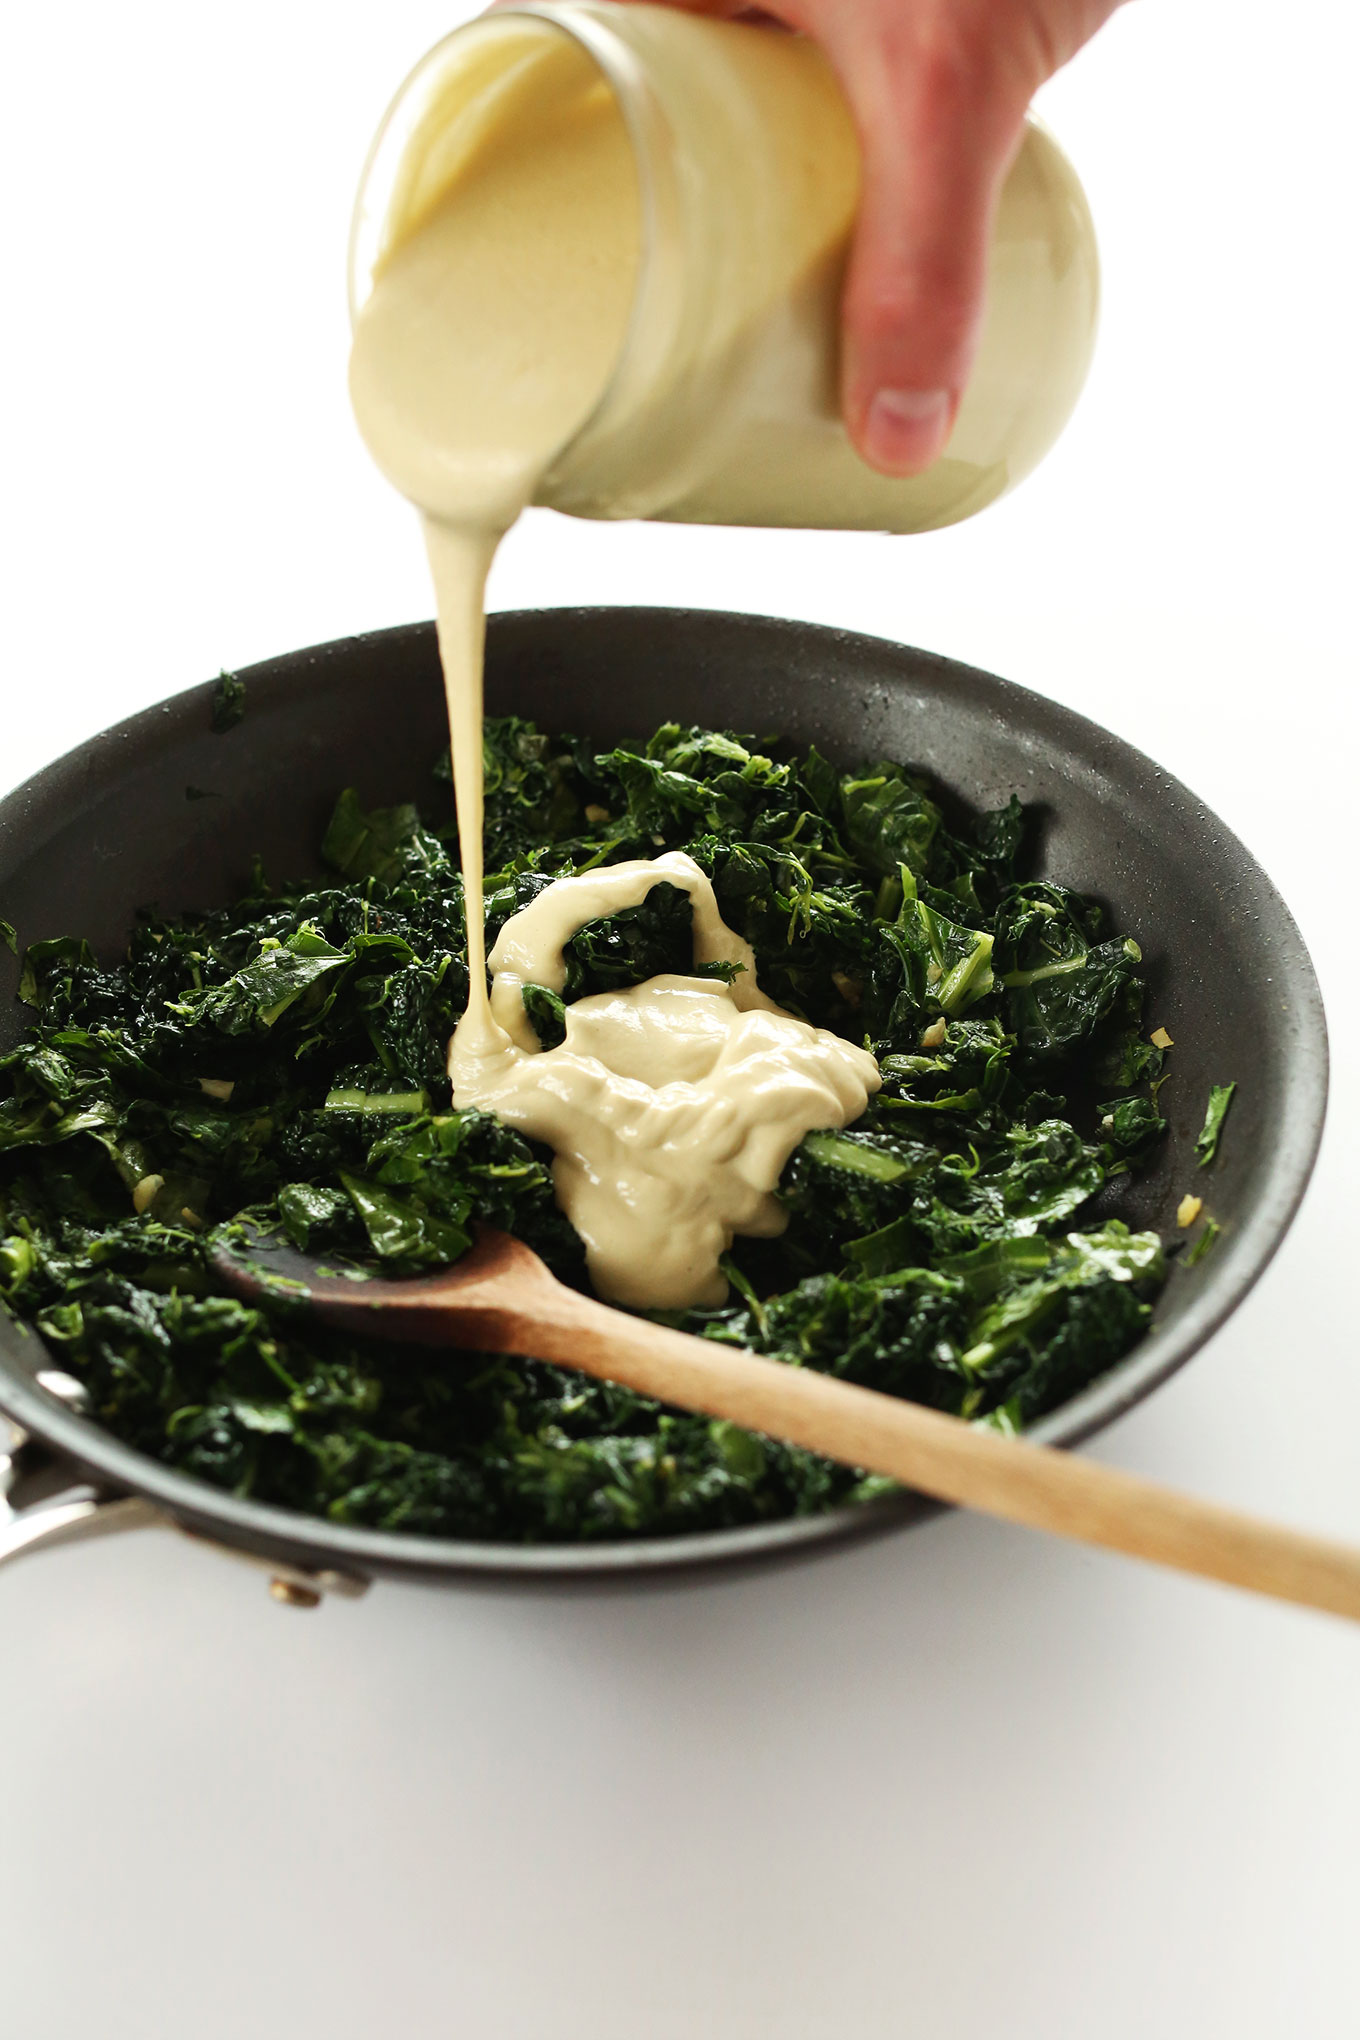 Pouring cashew sauce onto greens for healthy vegan Kale and Spinach Dip